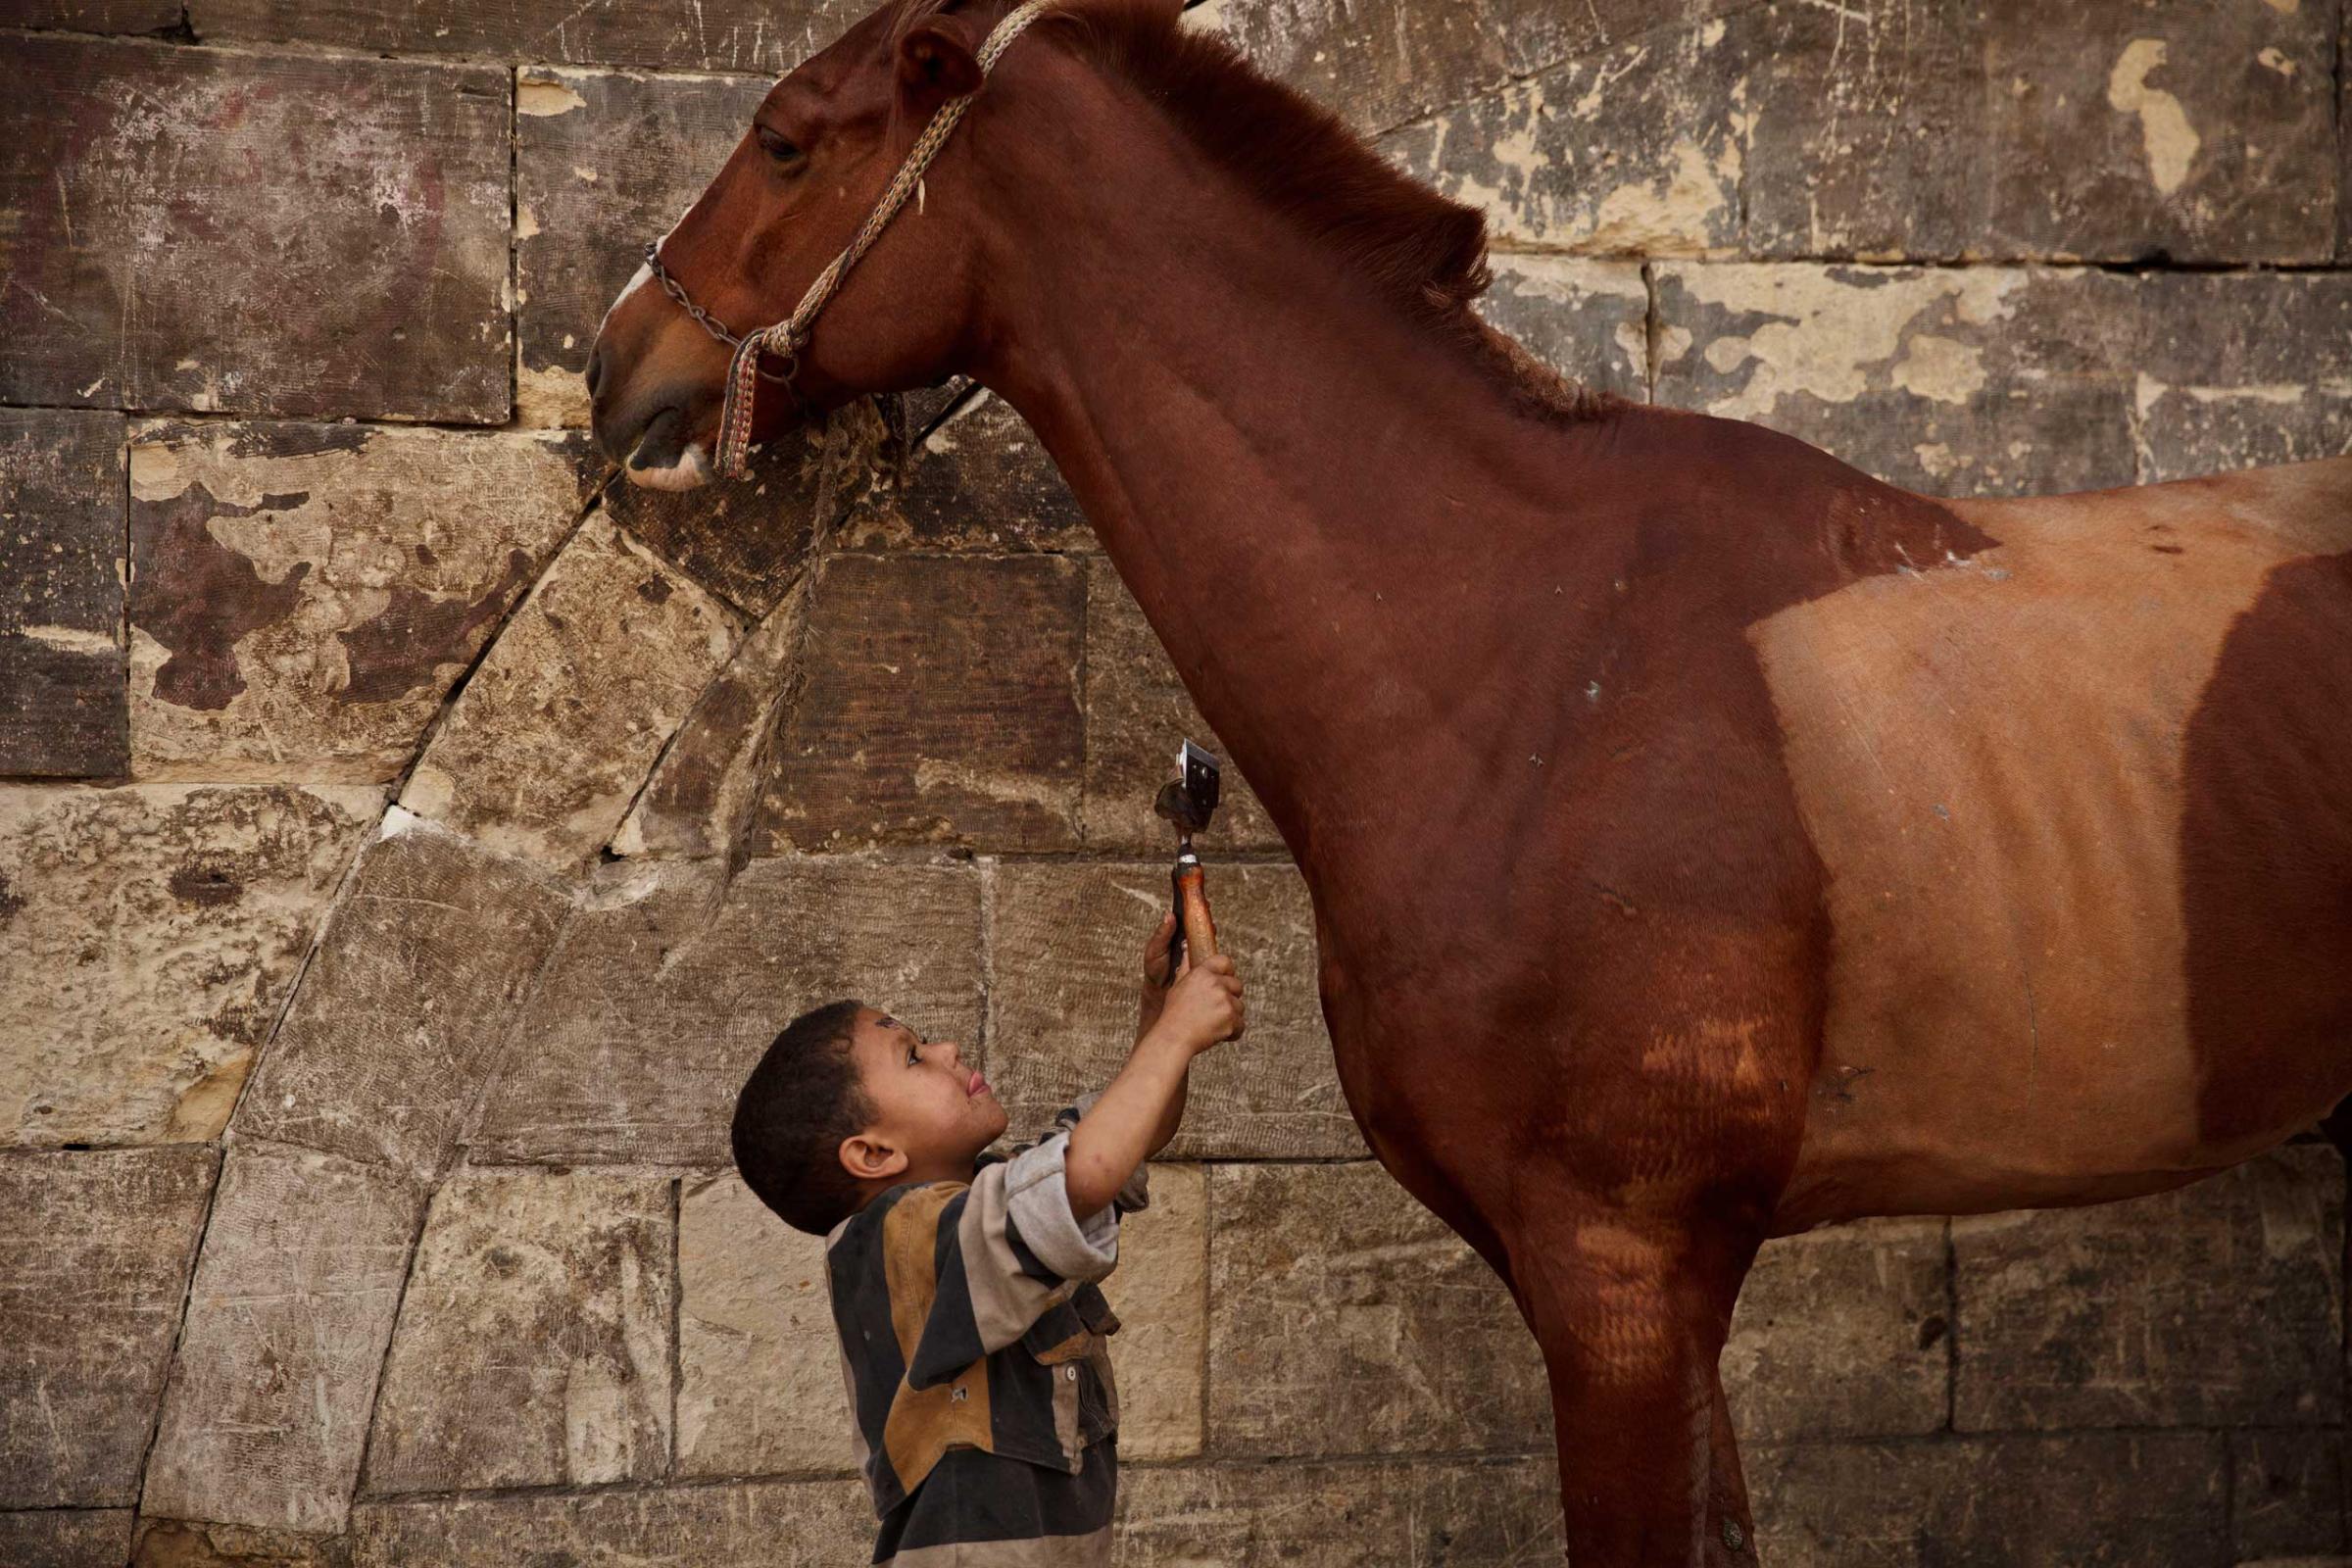 Mustafa Mohamed, 5, reaches to trim a horse at his father's makeshift animal barber shop in Cairo, March 8, 2014.